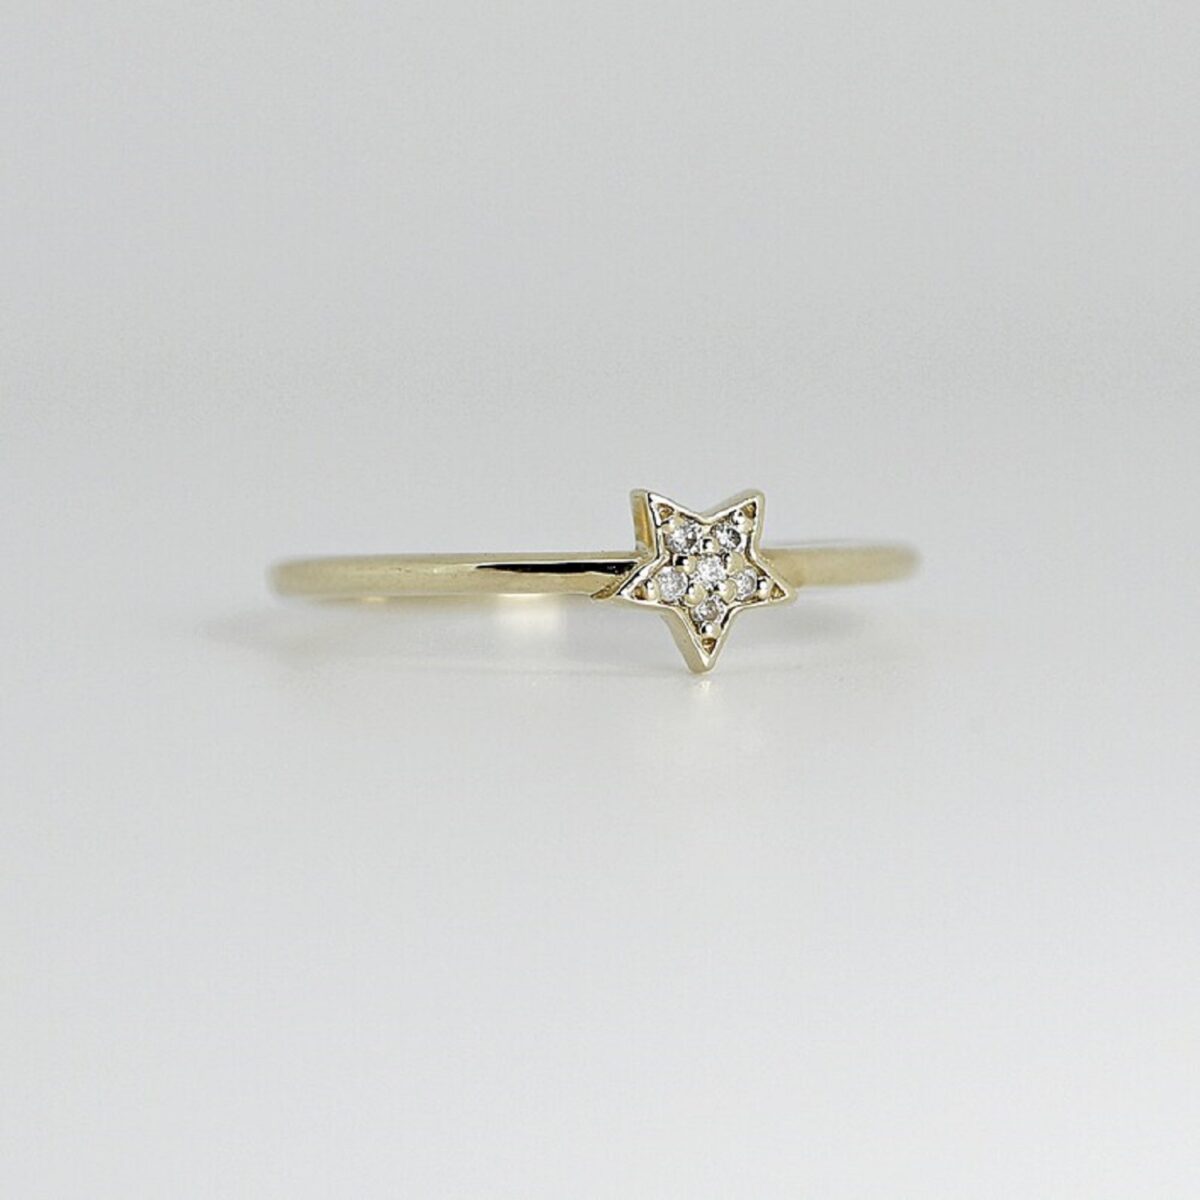 Unique star shaped round cut lab grown diamond statement ring in 14k yellow gold.